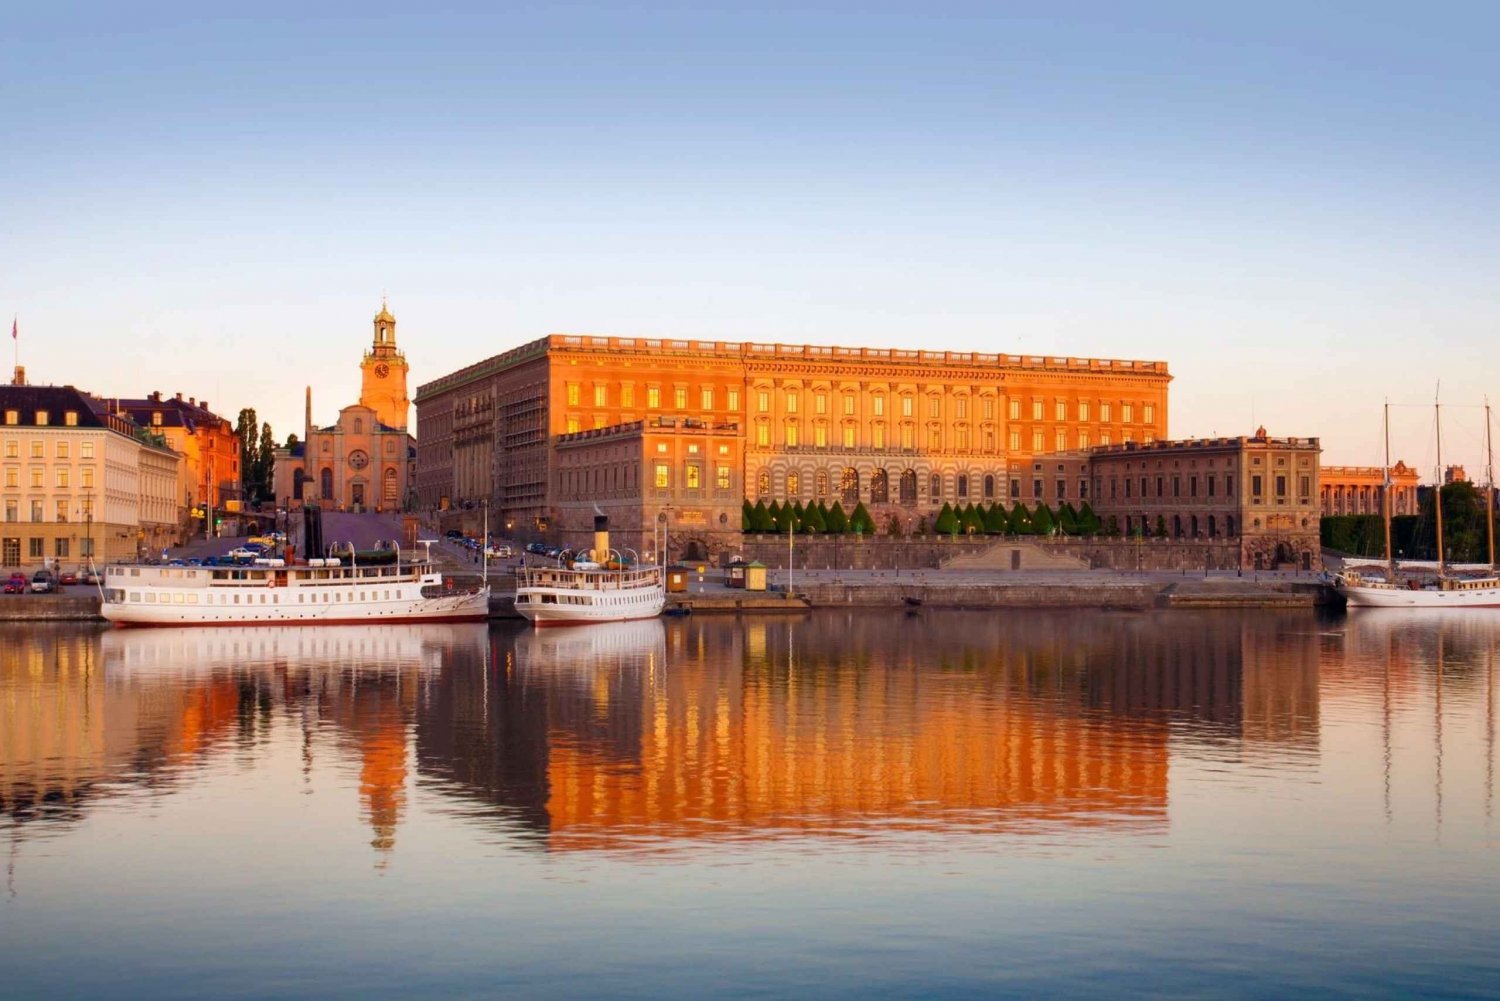 Panoramic Stockholm: Private Tour with a Vehicle